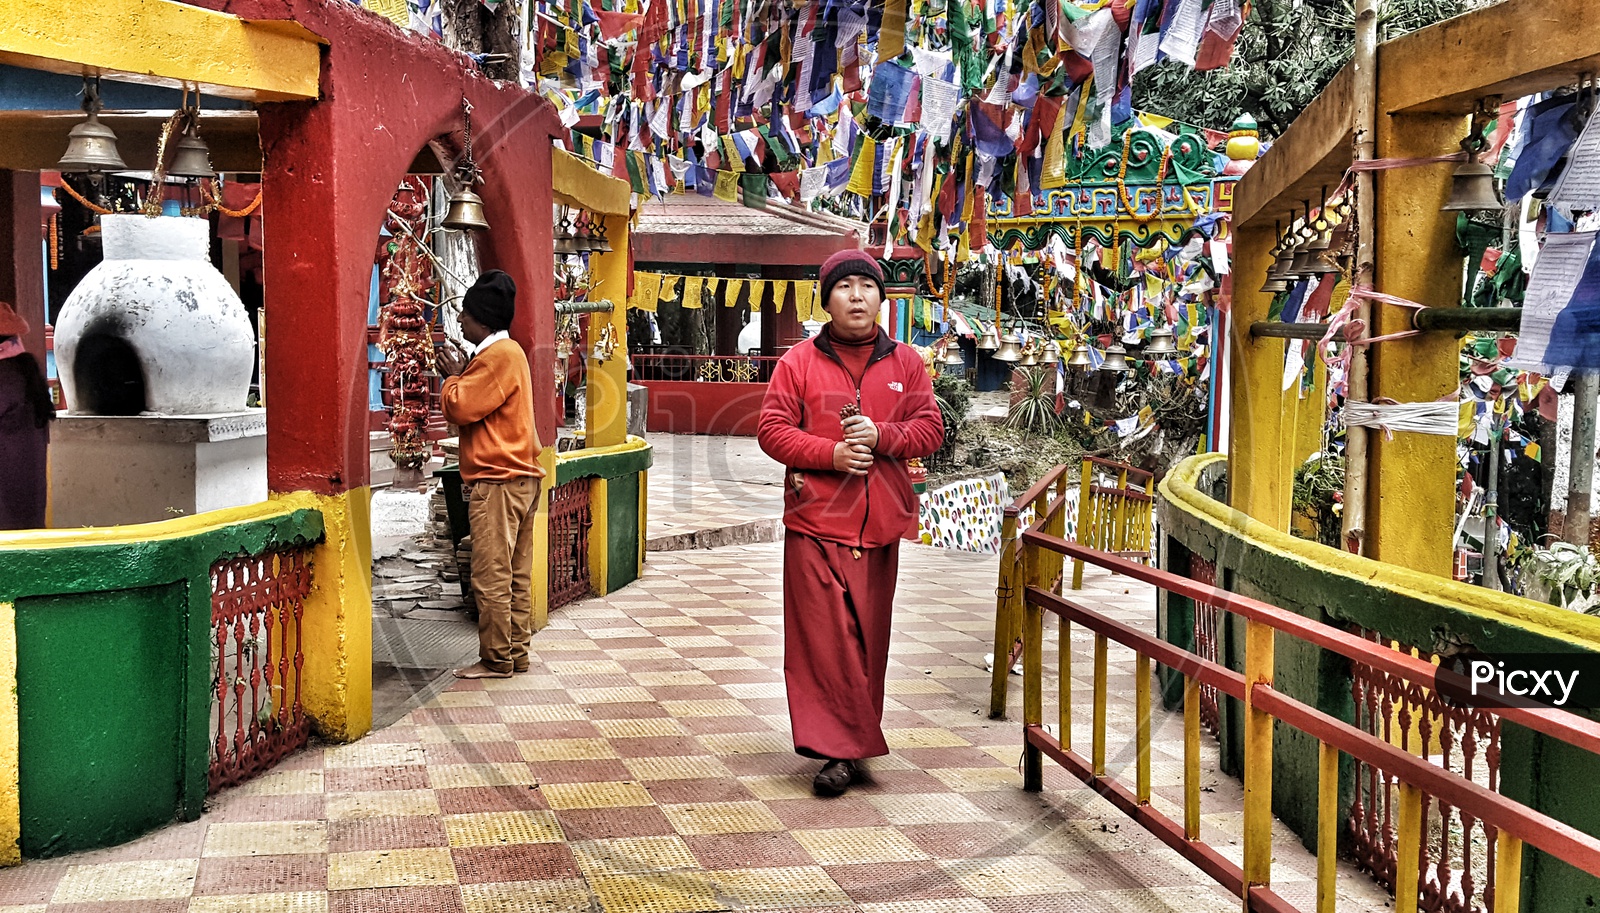 The buddhist monk in the Mahakal Temple